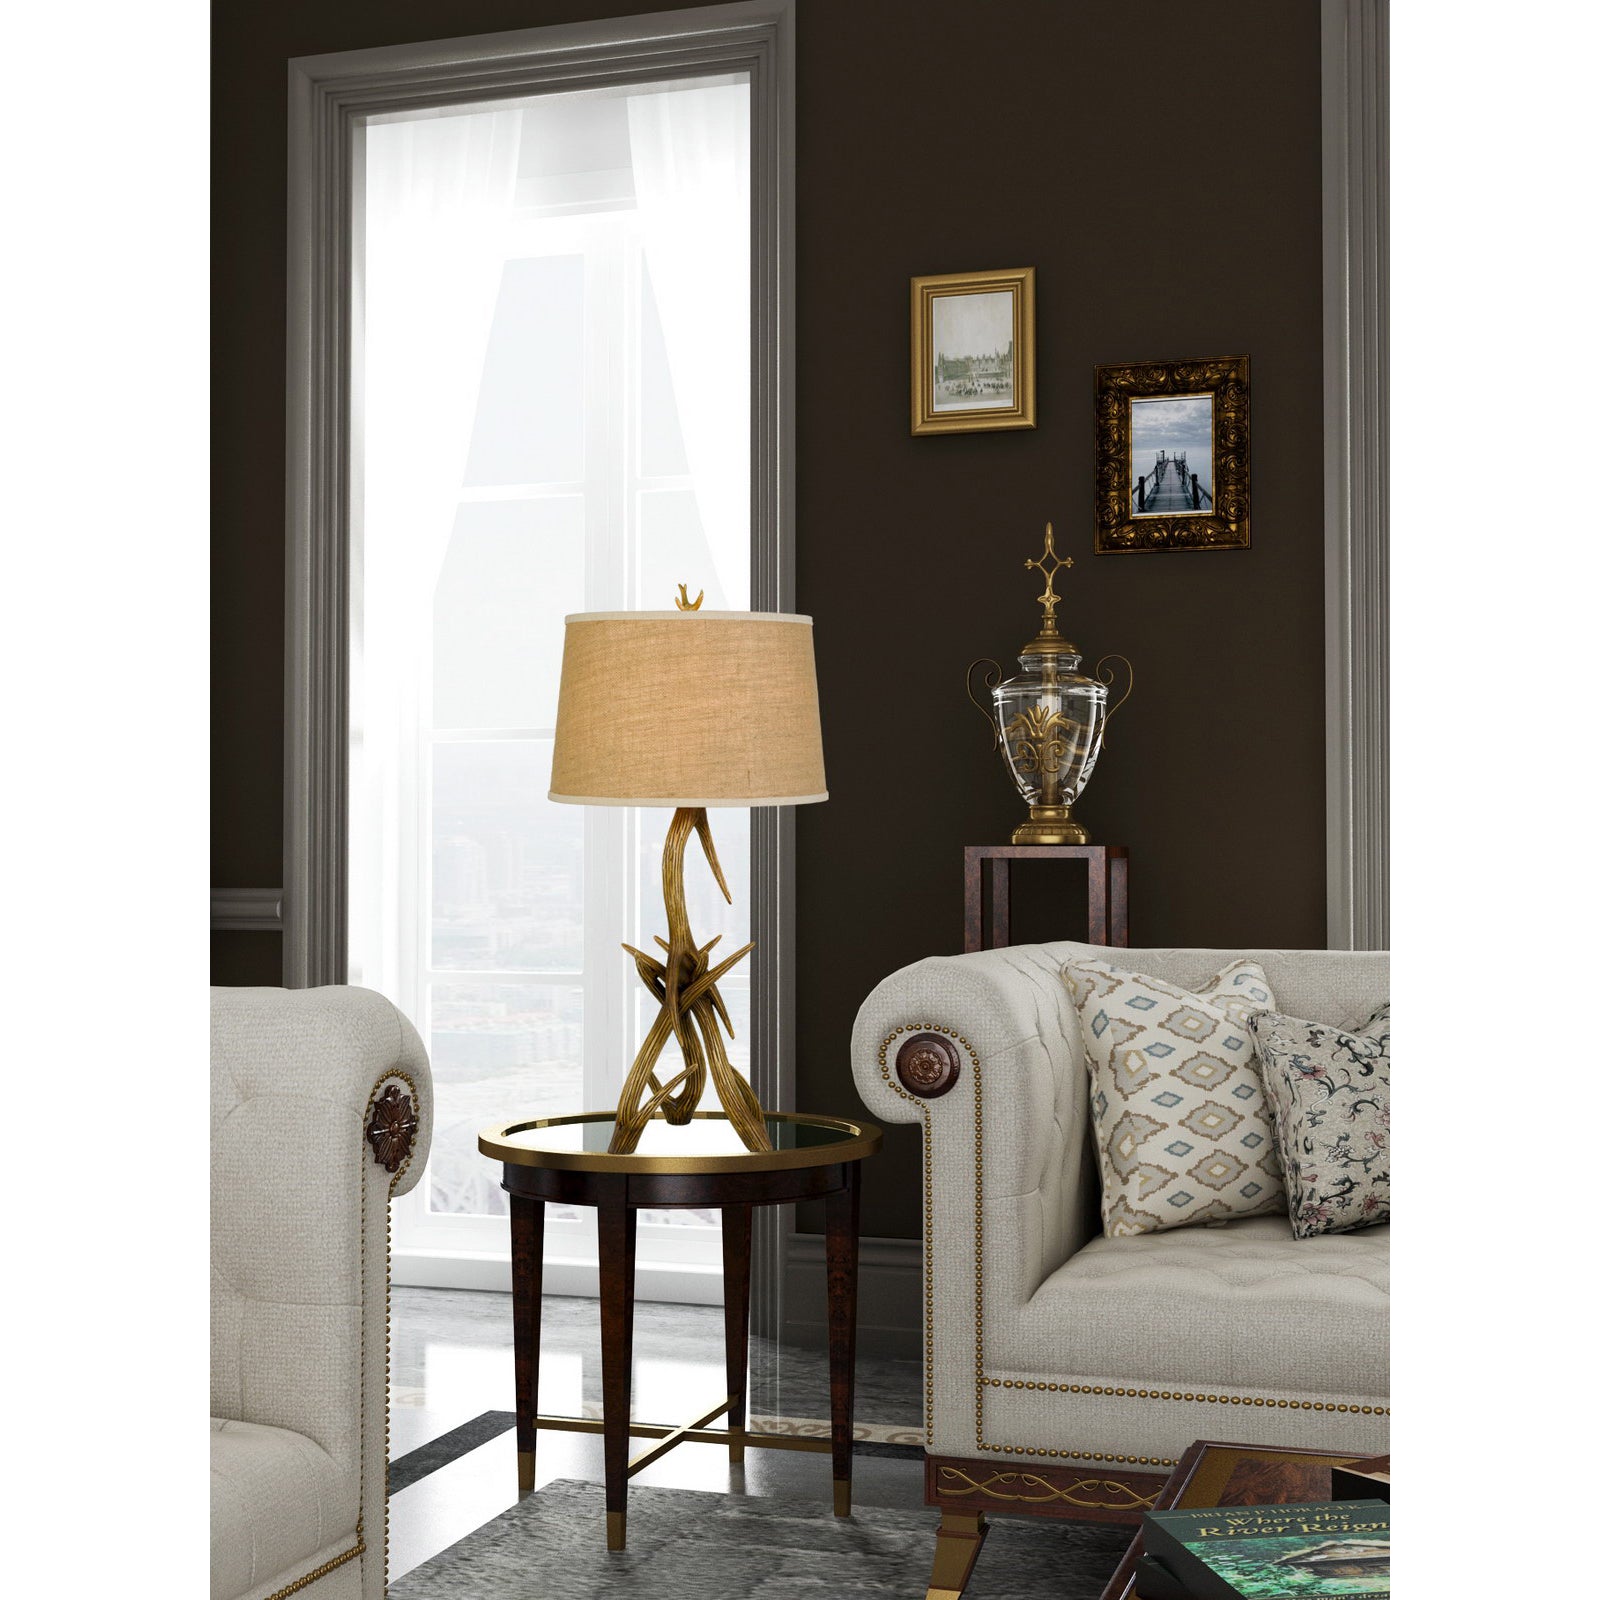 33" Brown Antlers Table Lamp With Brown Empire Shade